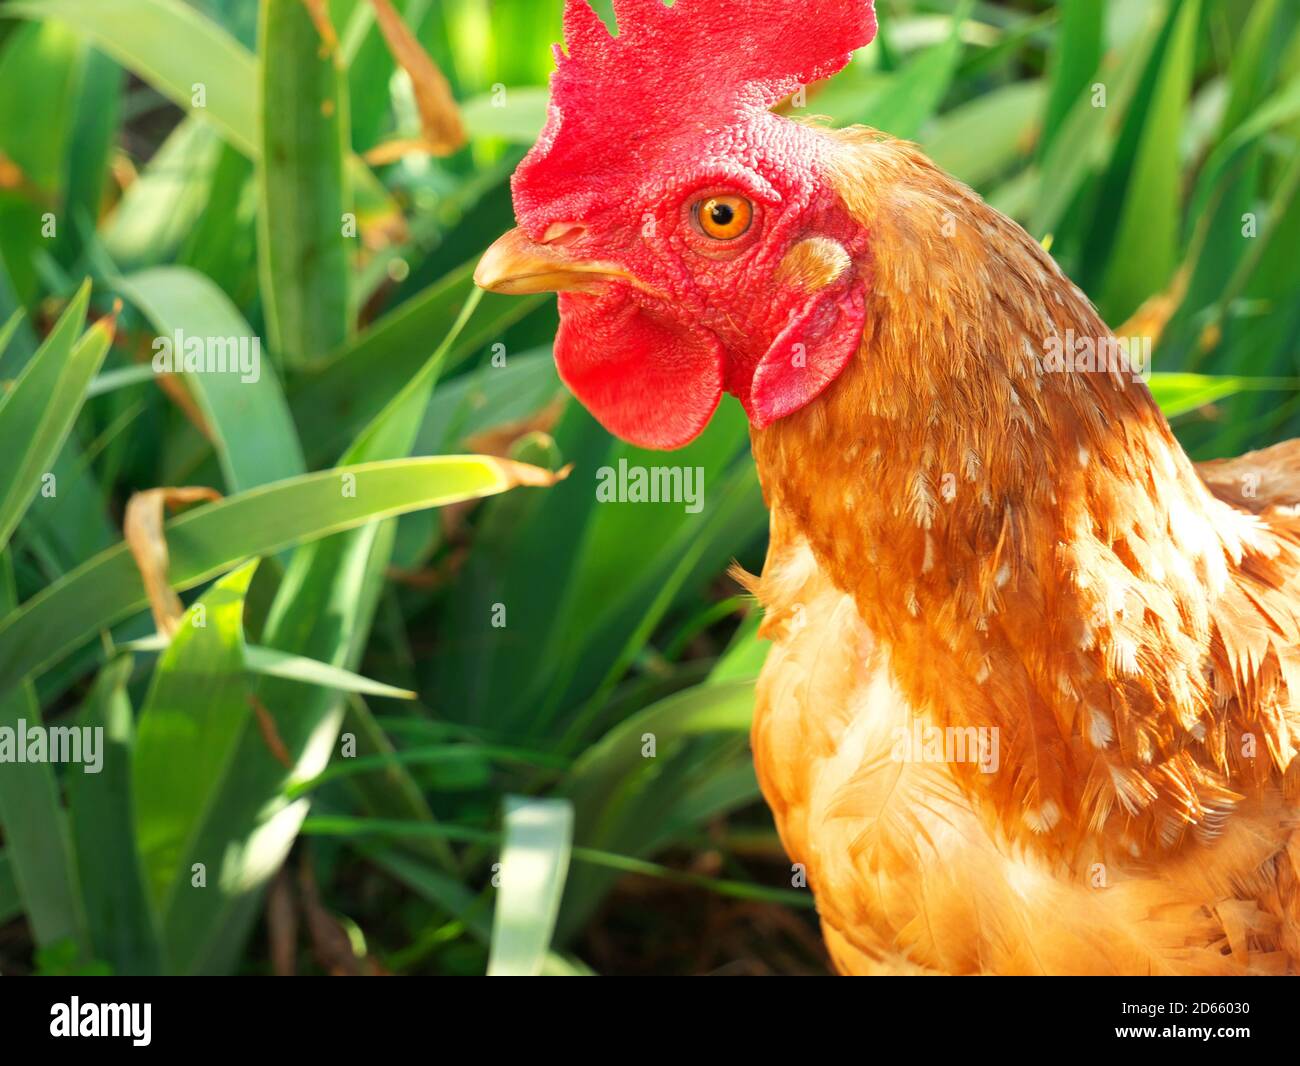 Close-up on the head of a redheaded hen seen from the side, in nature Stock Photo